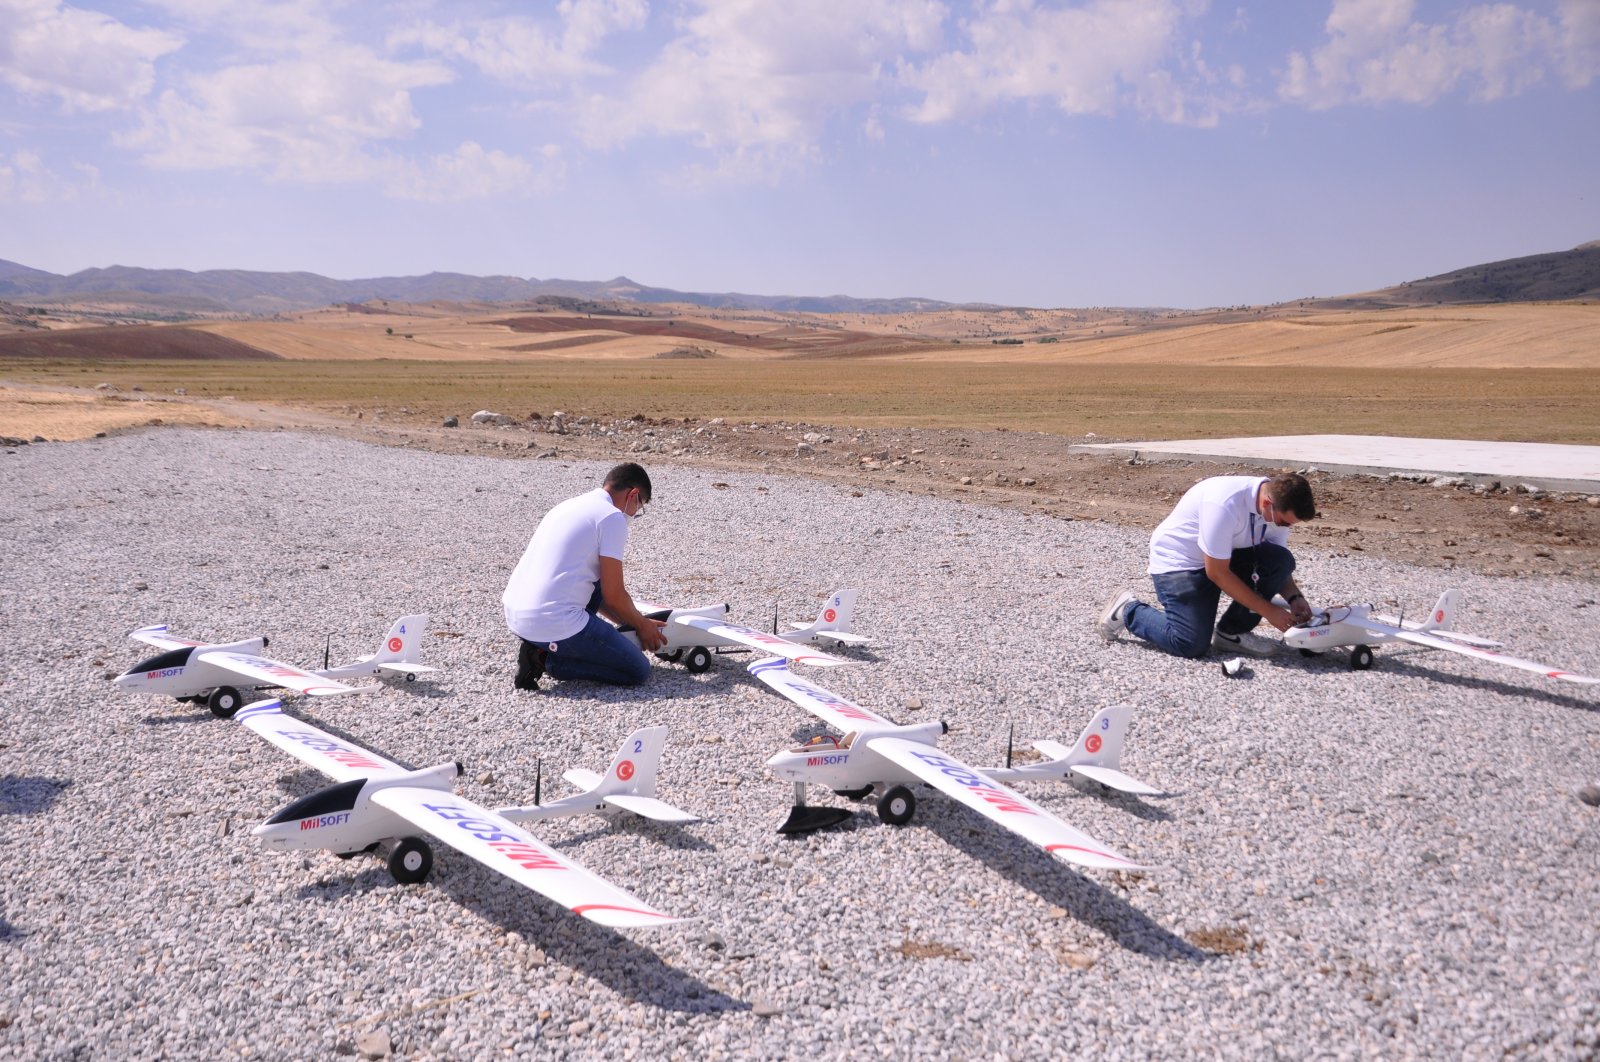 Unmanned aerial vehicles to be used in a herd concept by MilSOFT software are seen in this photo provided on Nov. 19, 2020. (Photo by MilSOFT via AA)